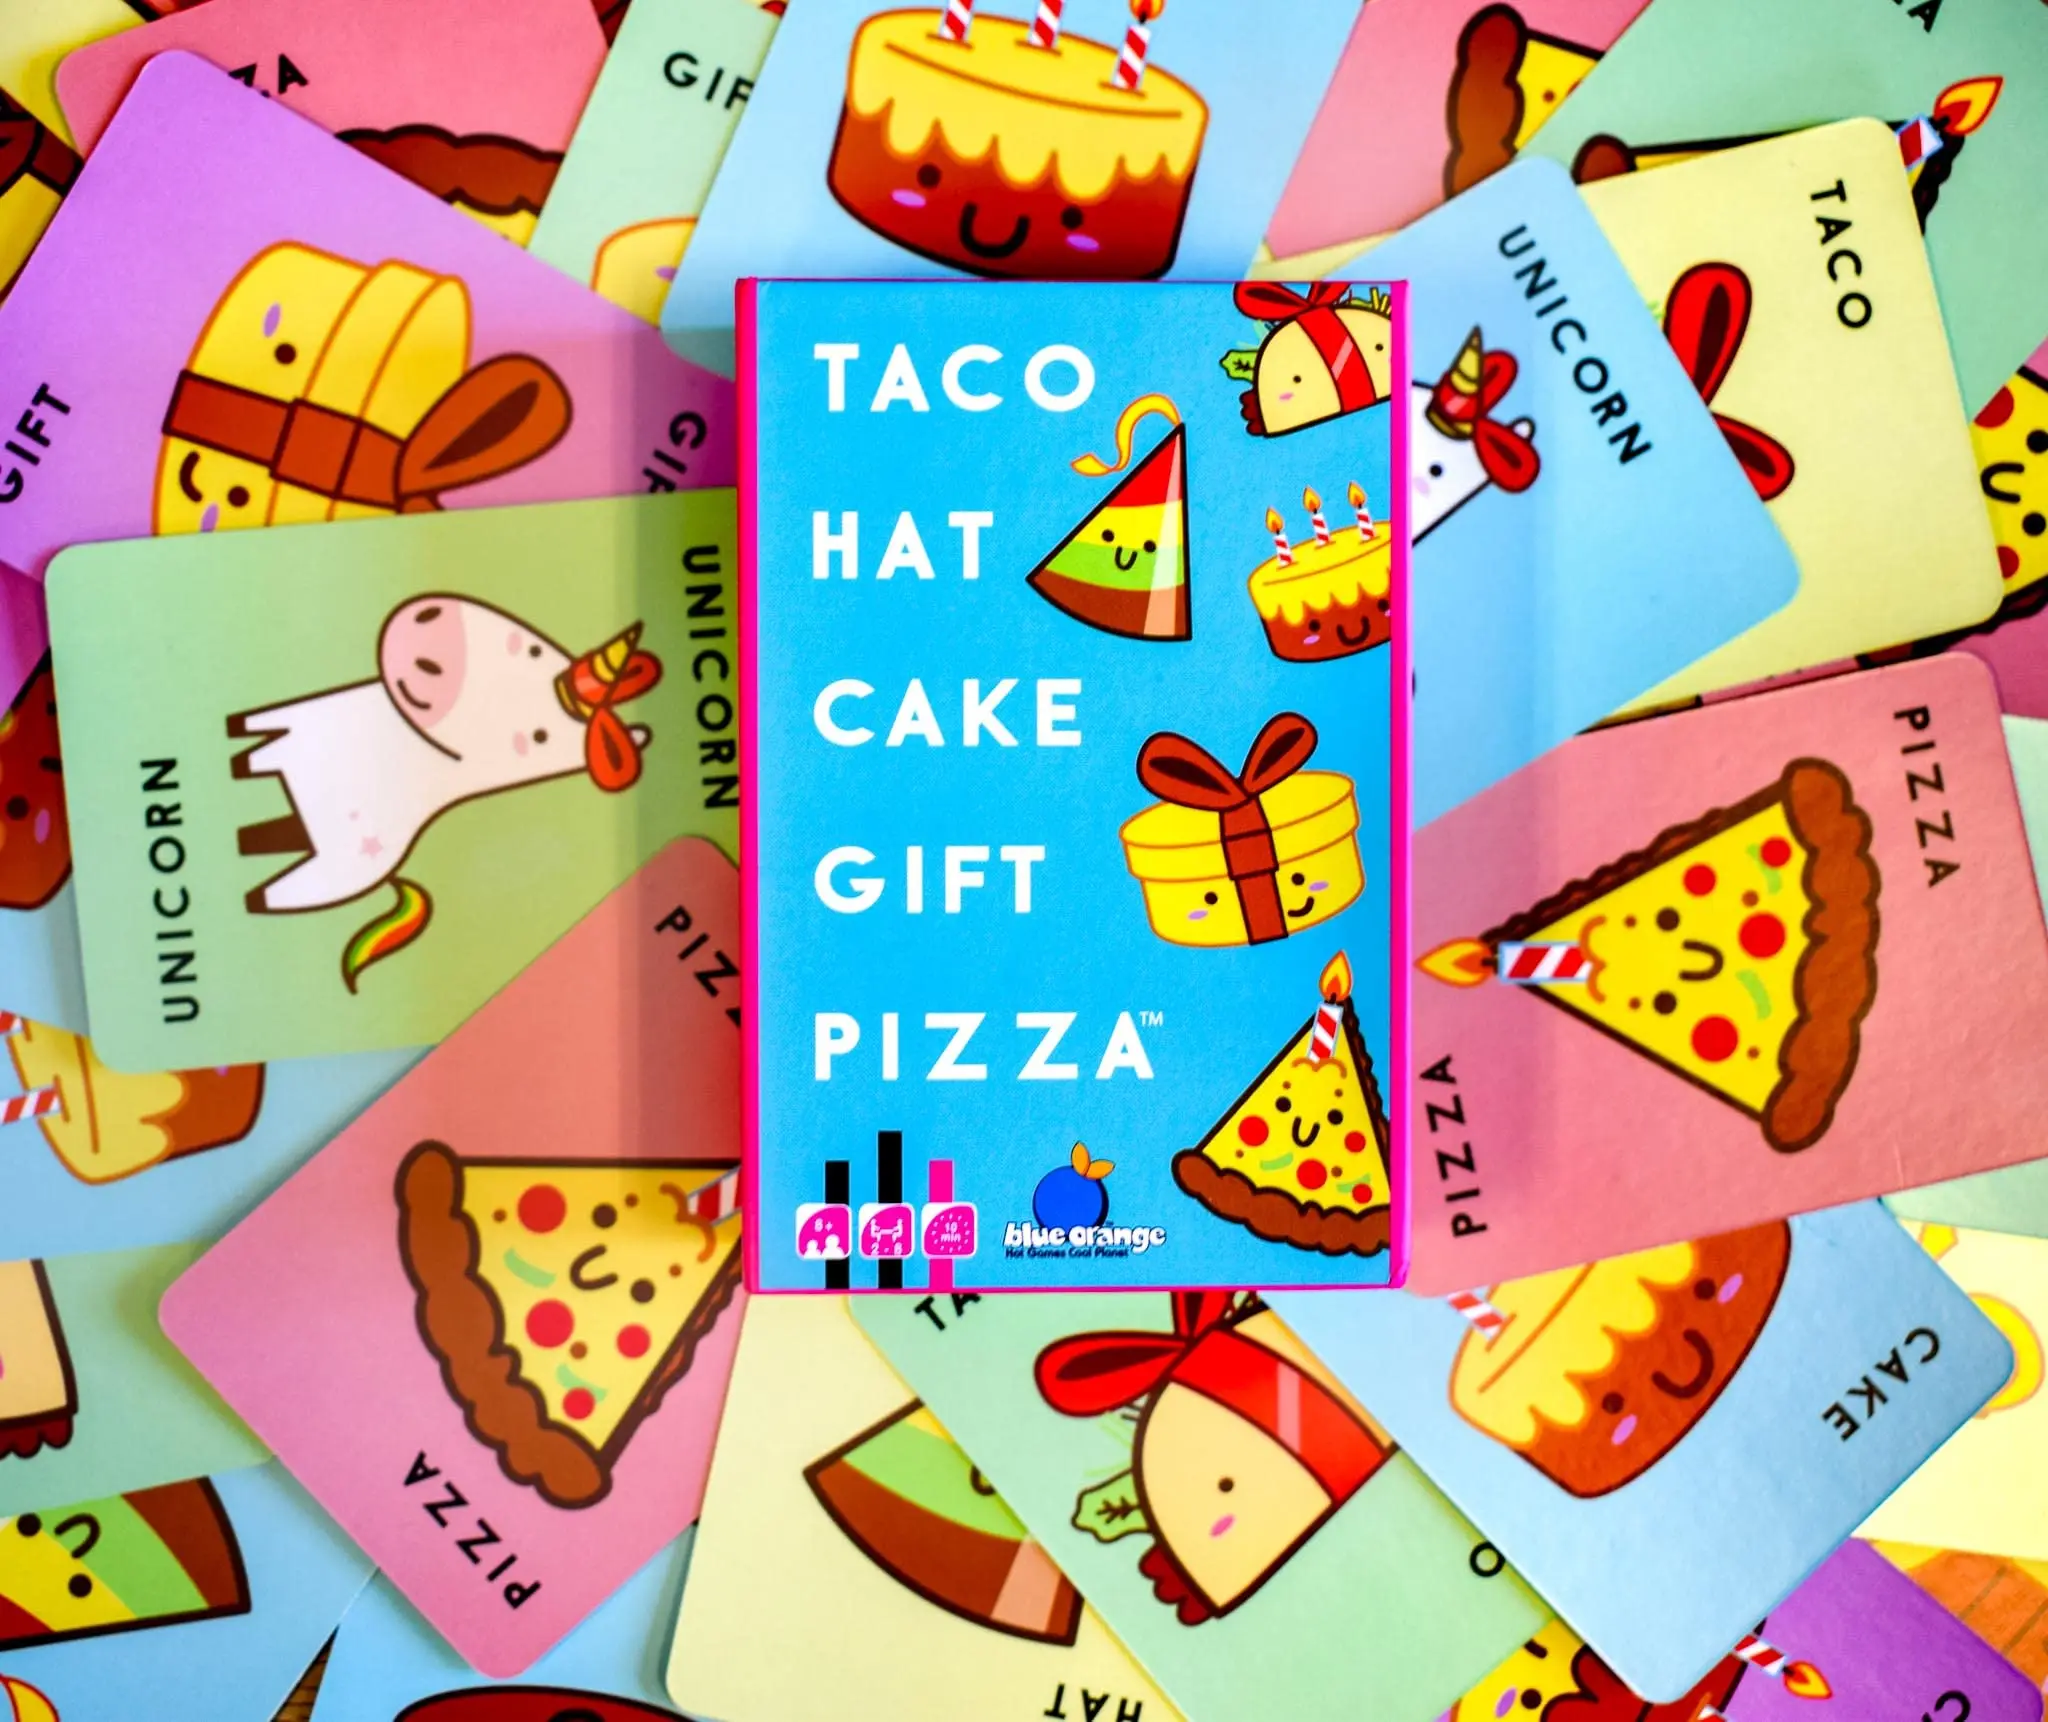 taco hat cake gift pizza - How do you play Taco Hat Cake gift pizza